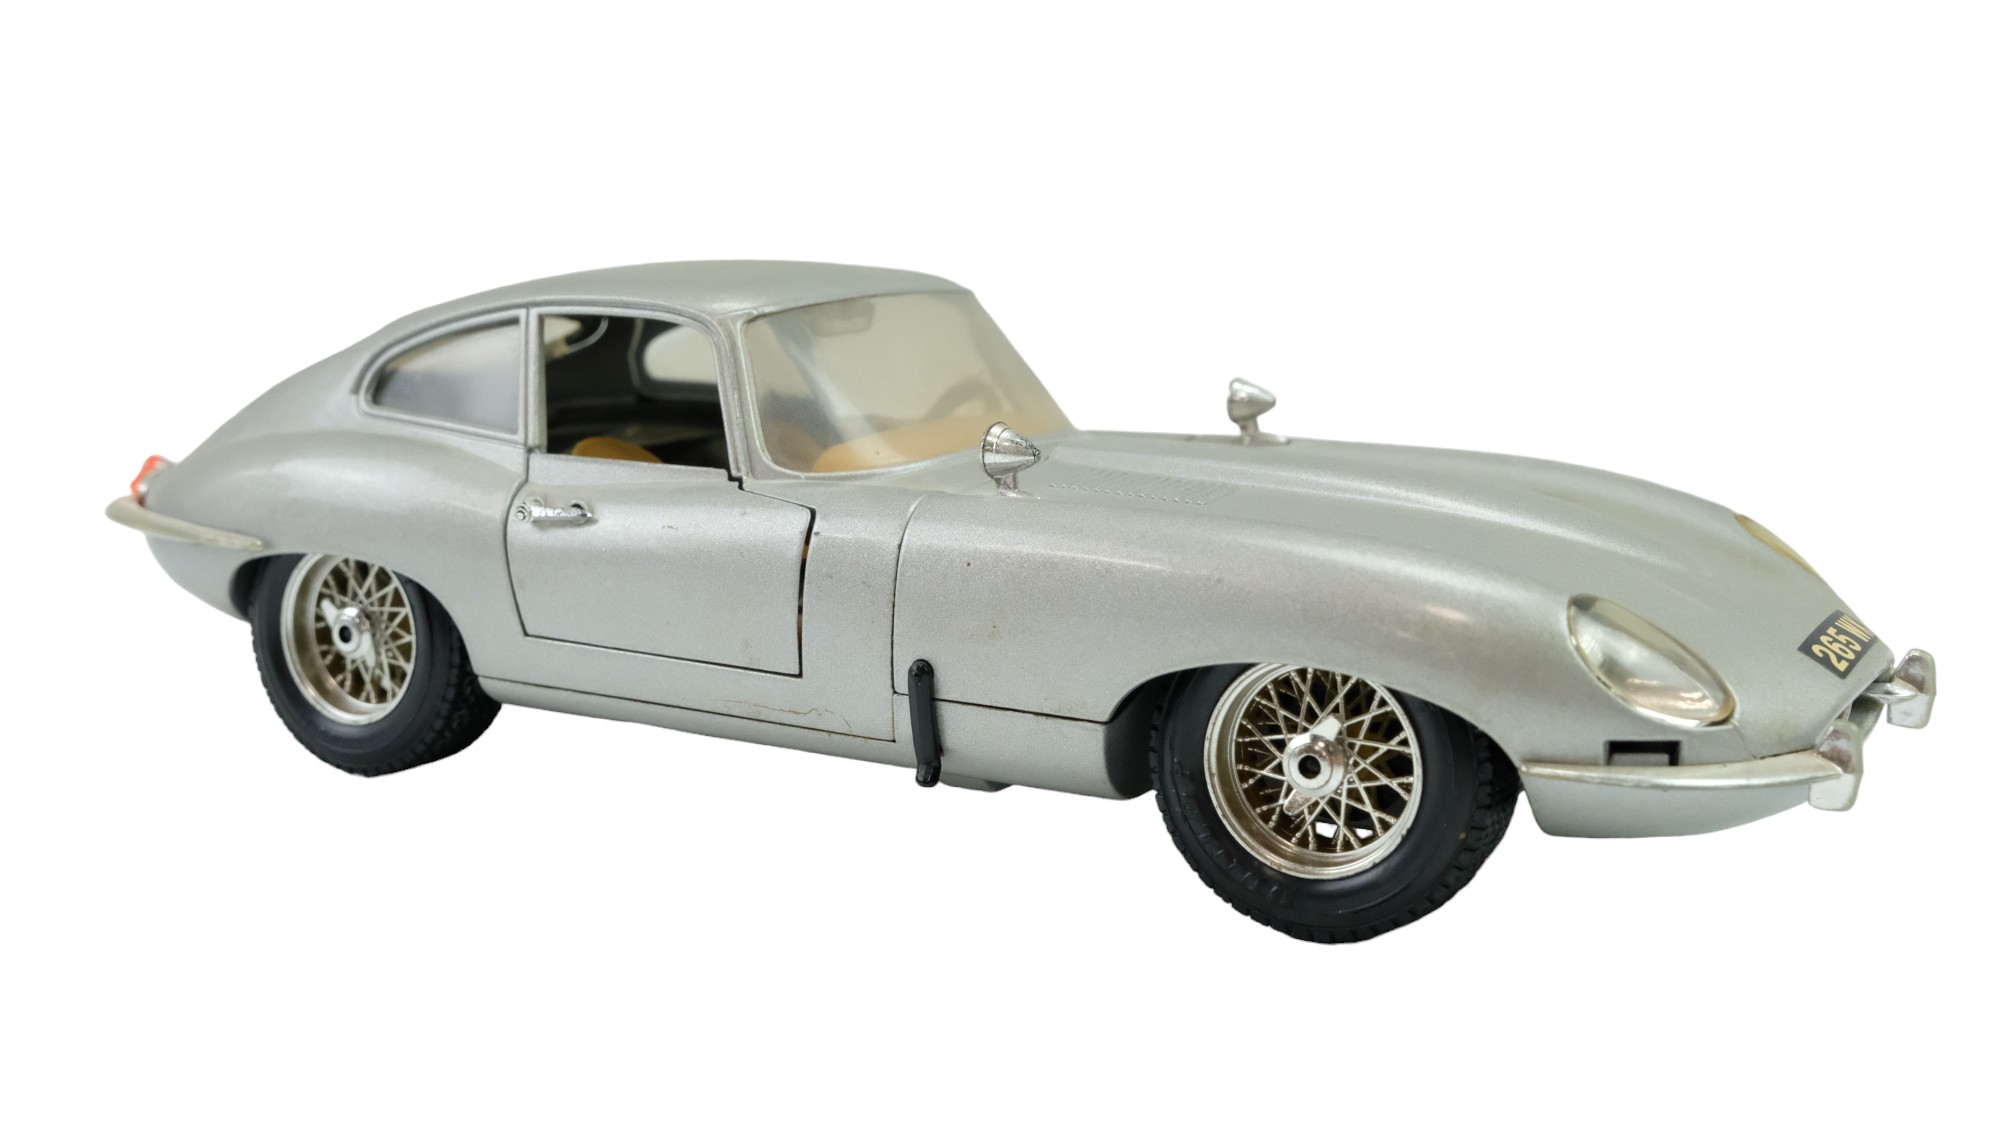 A Bburago Jaguar E-Type (1961) together with sundry Lledo diecast cars and vans - Image 4 of 5